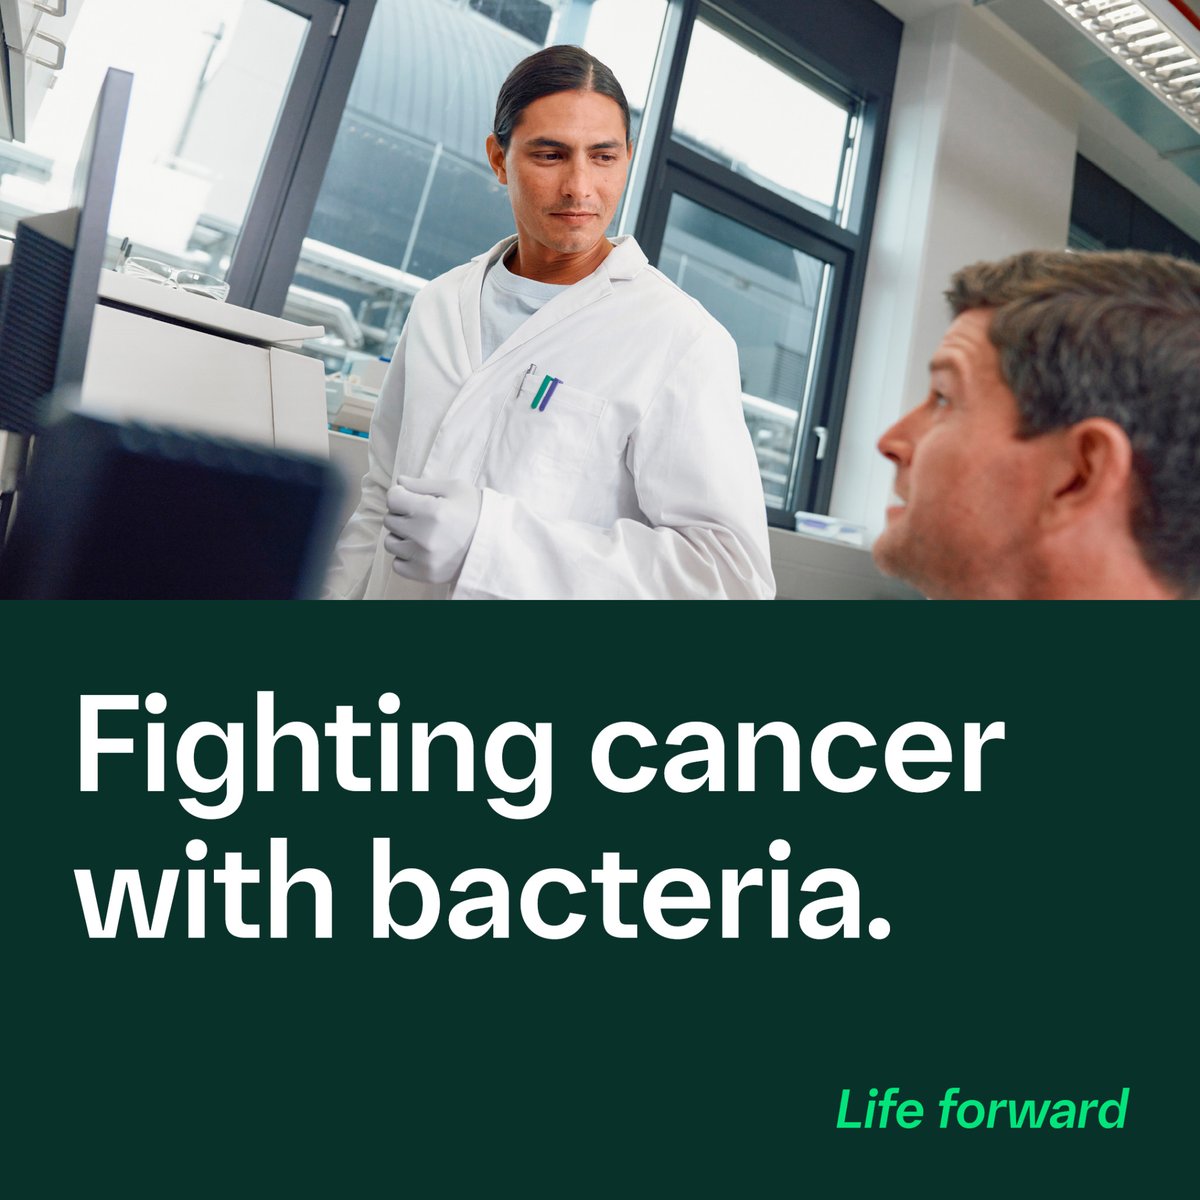 #NEWS: We are acquiring T3 Pharmaceuticals aiming to cure cancers and transform lives through science. Learn more about how we will realize the full potential of this novel cancer therapy platform: bit.ly/47BJHjm #ResearchCollaboration #ImmunoOncology #Cancer